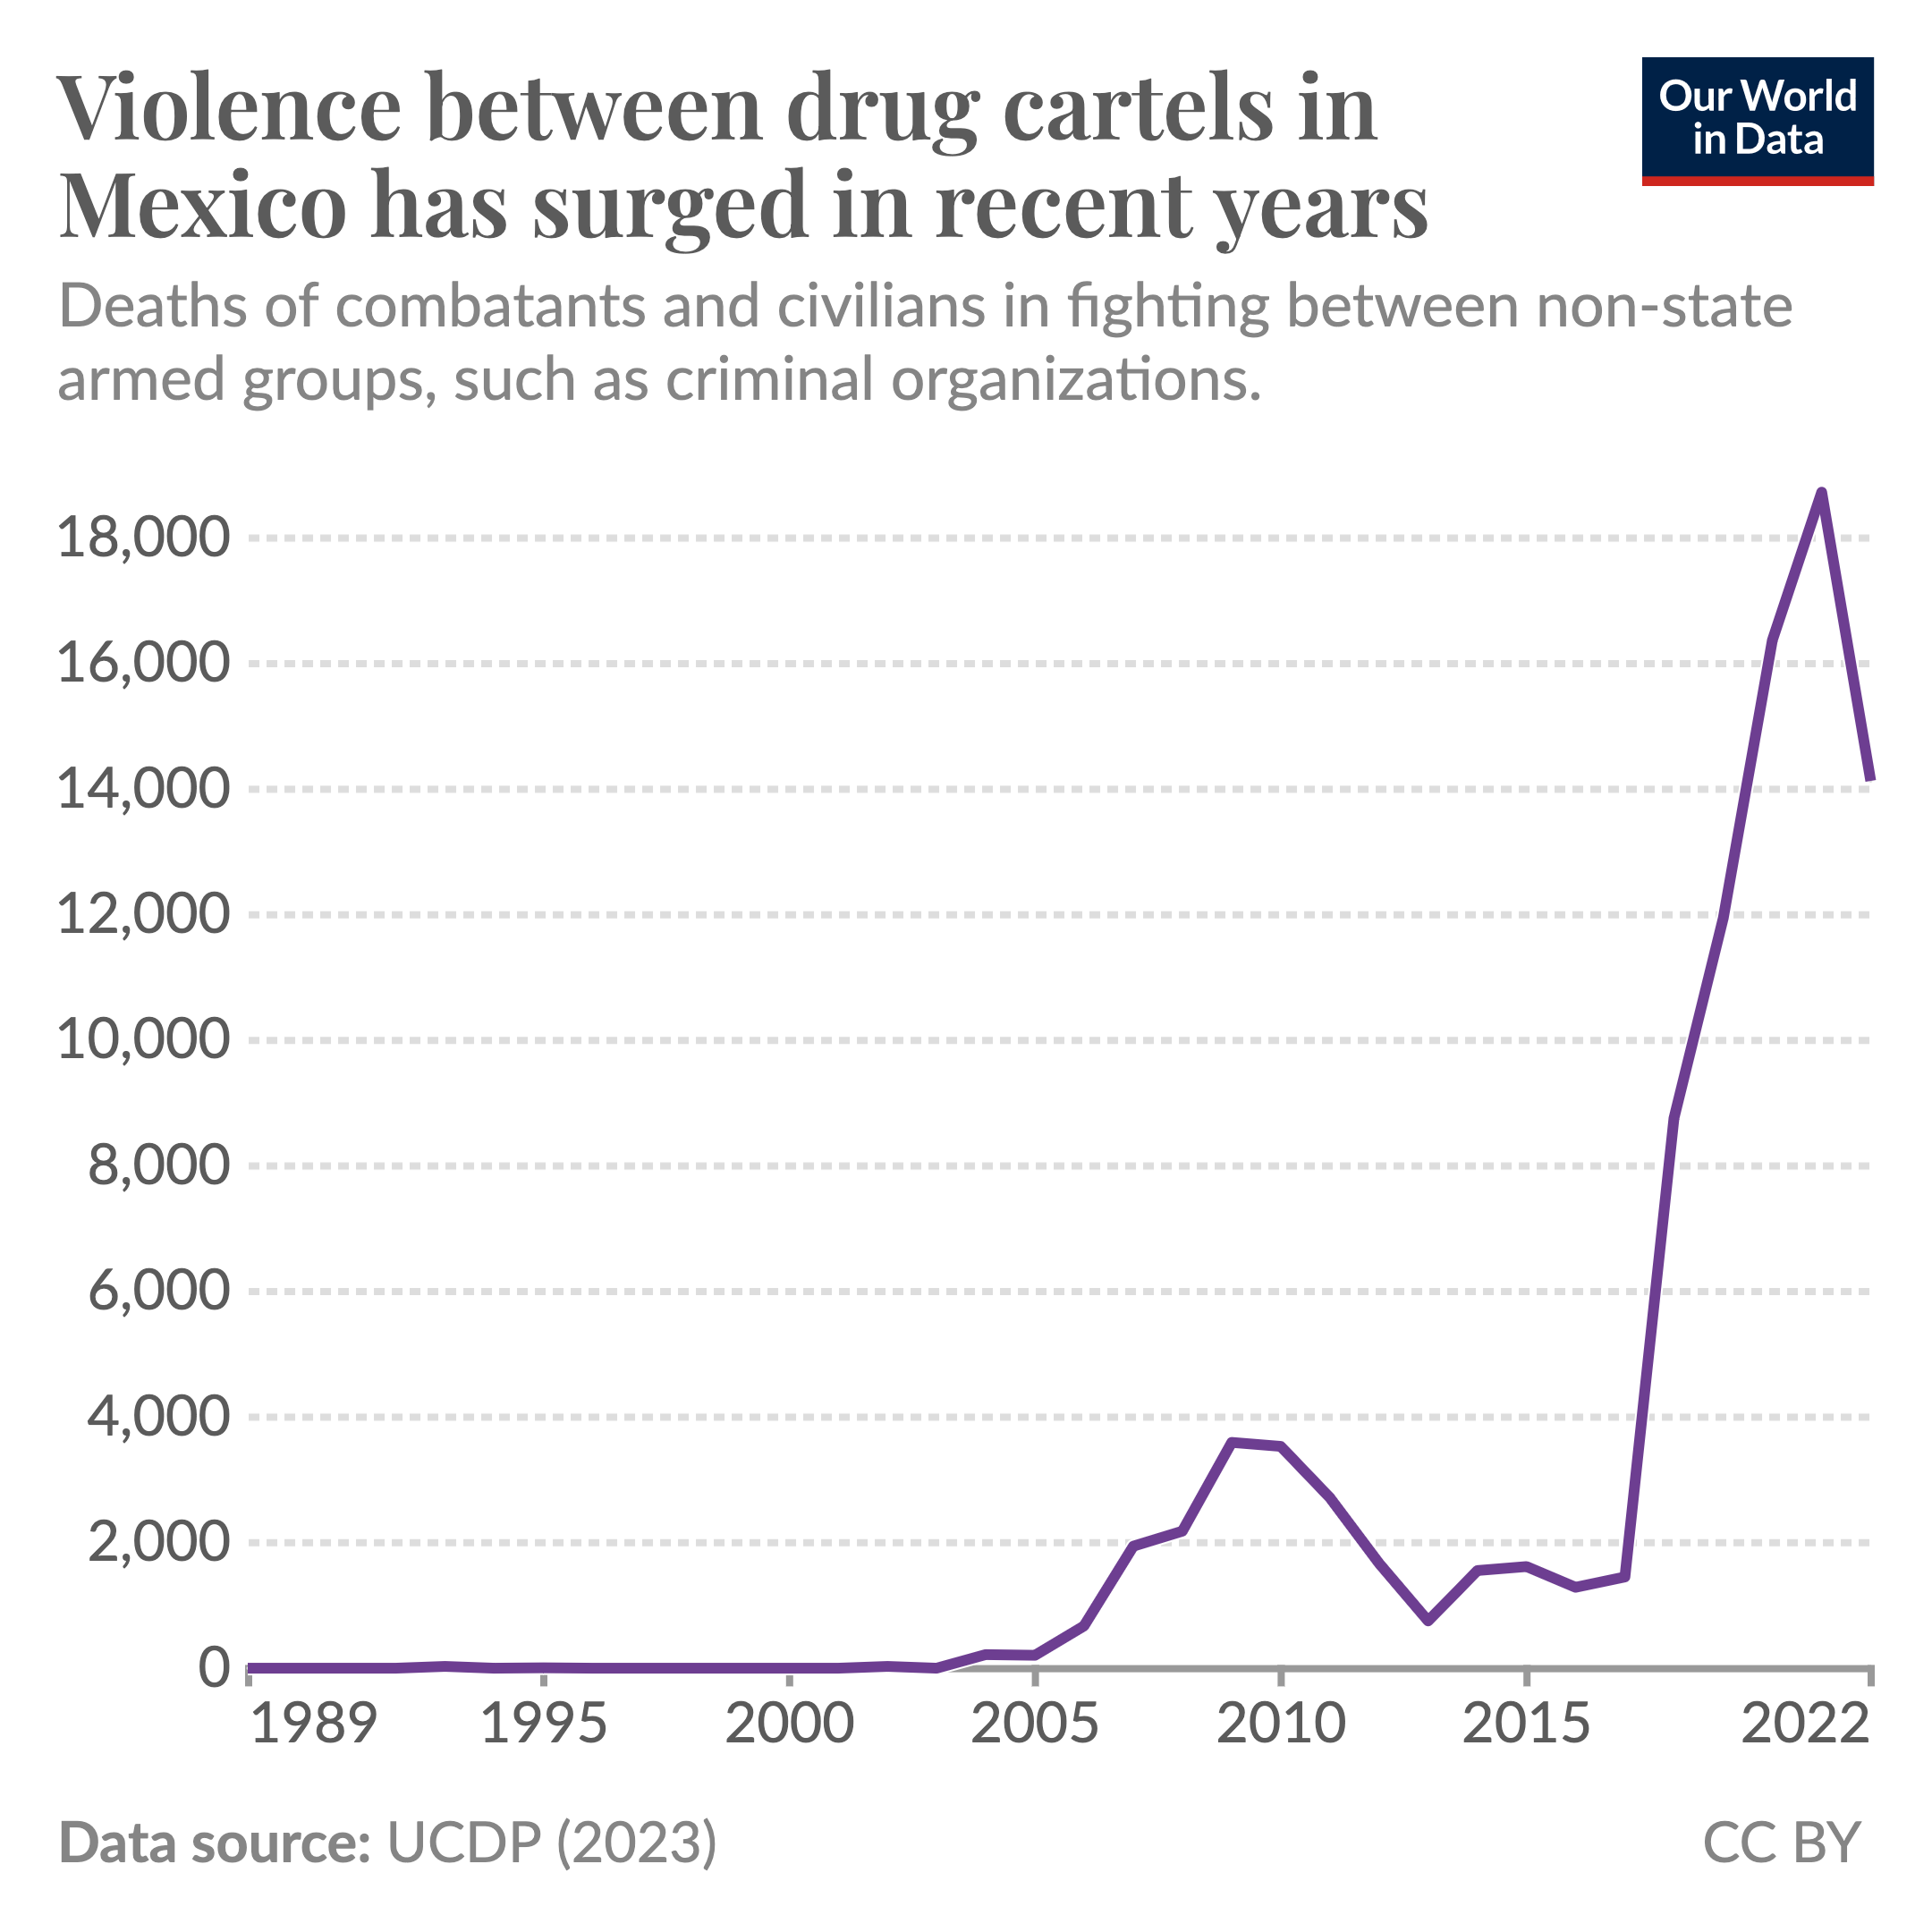 Violence between Mexican drug cartels has surged in recent years